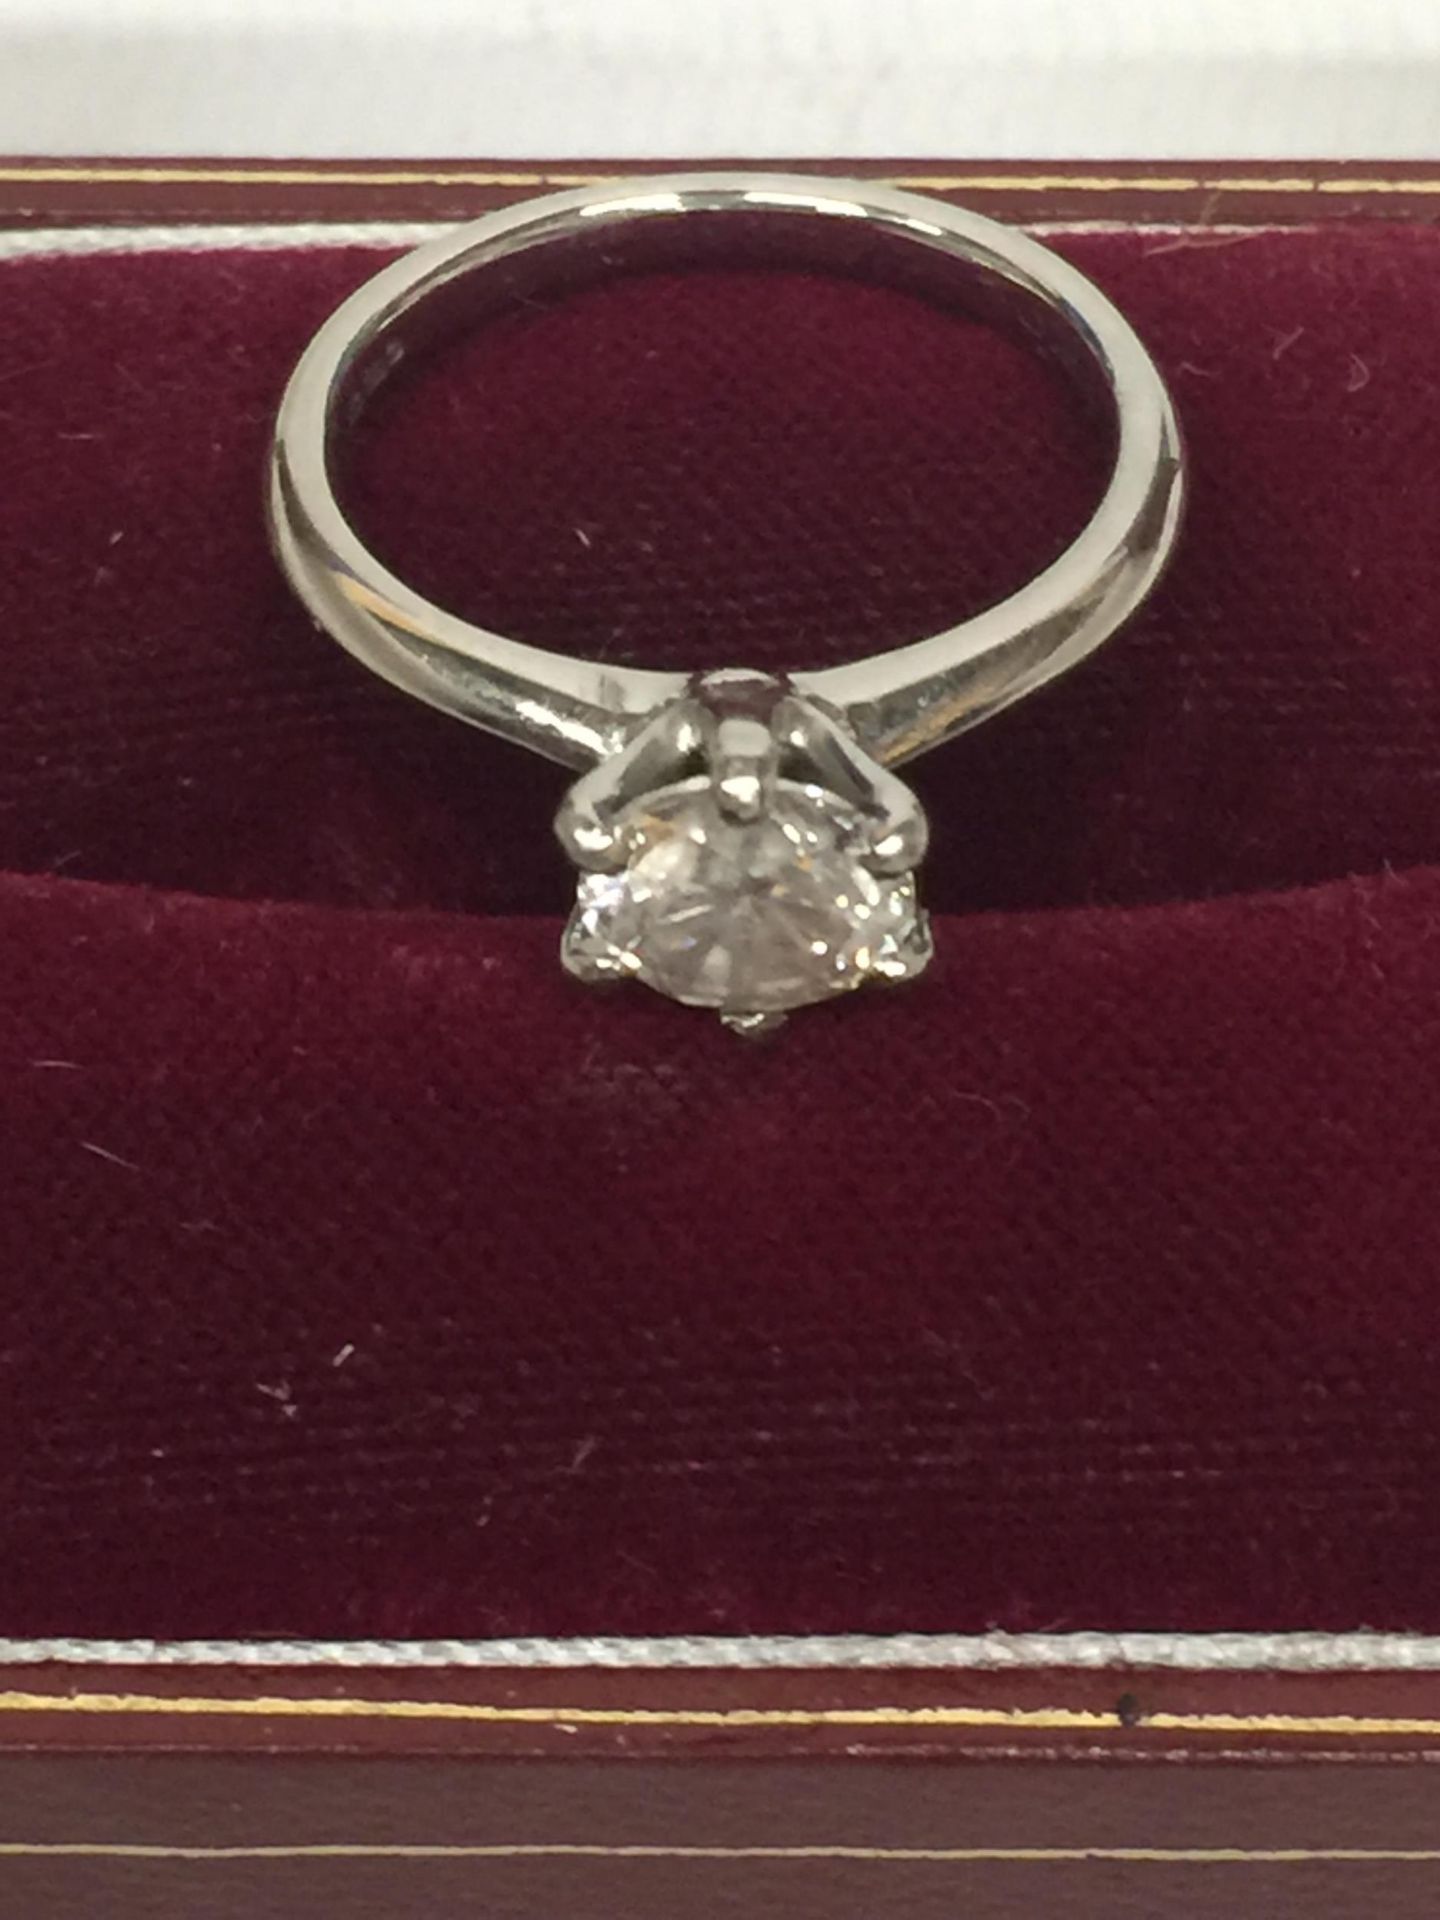 A PLATINUM (PT950) RING WITH A ONE CARAT SOLITAIRE DIAMOND SIZE M